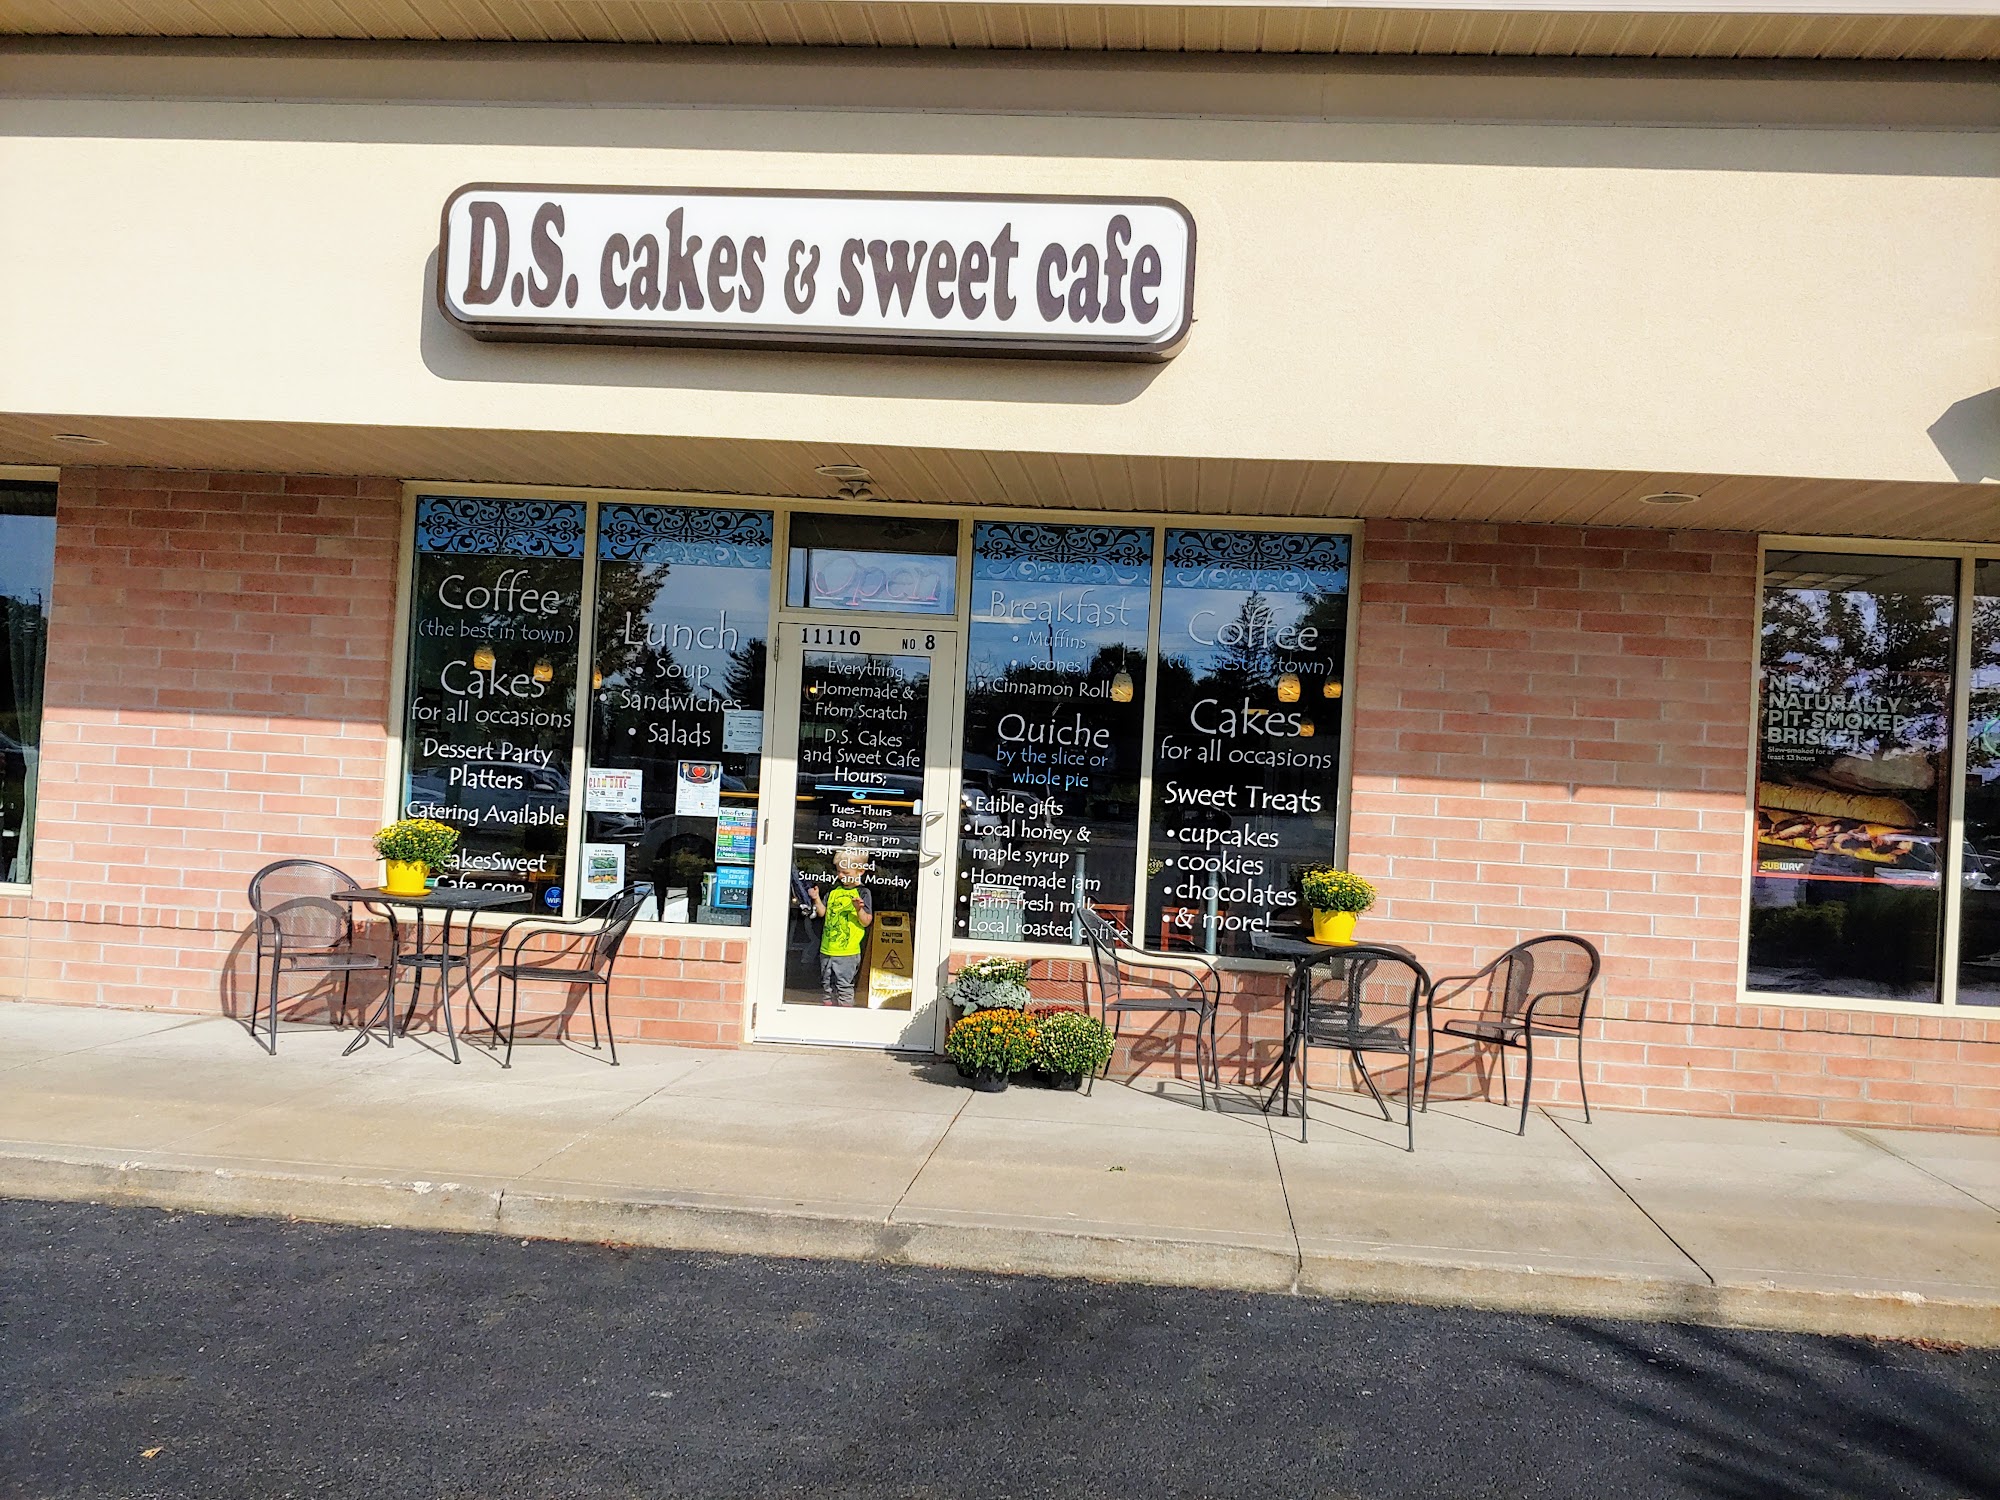 DS Cakes and Sweet Cafe